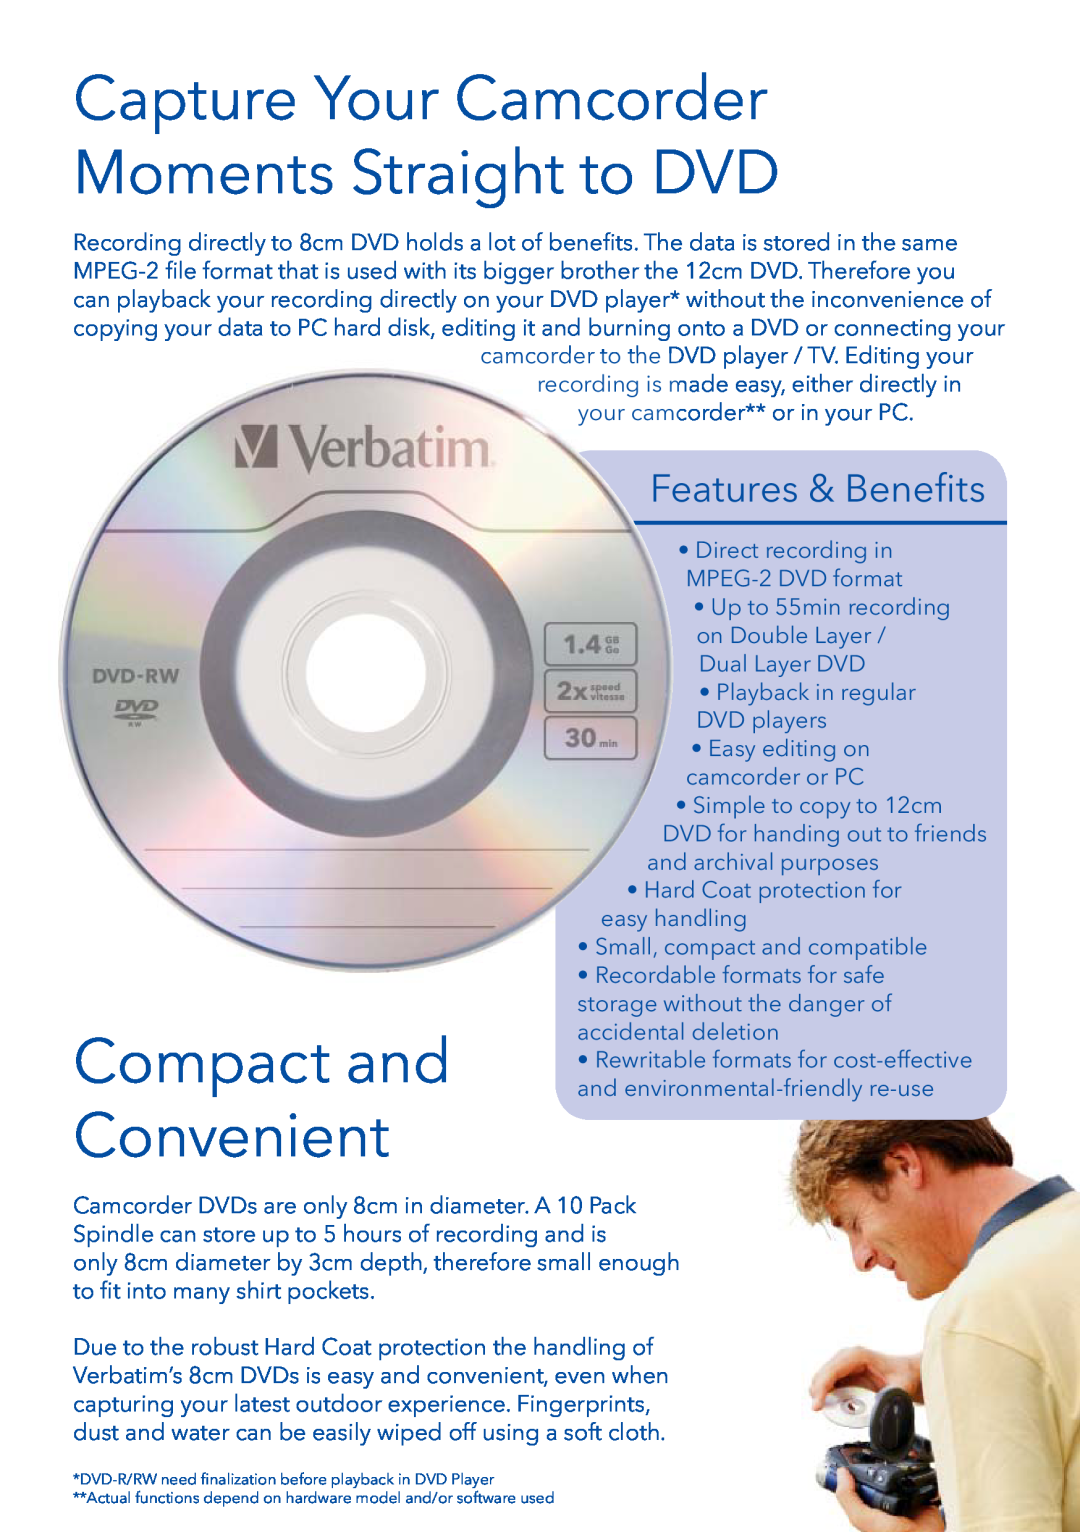 Verbatim 8cm DVD manual Capture Your Camcorder Moments Straight to DVD, Compact and Convenient, Features & Beneﬁts 